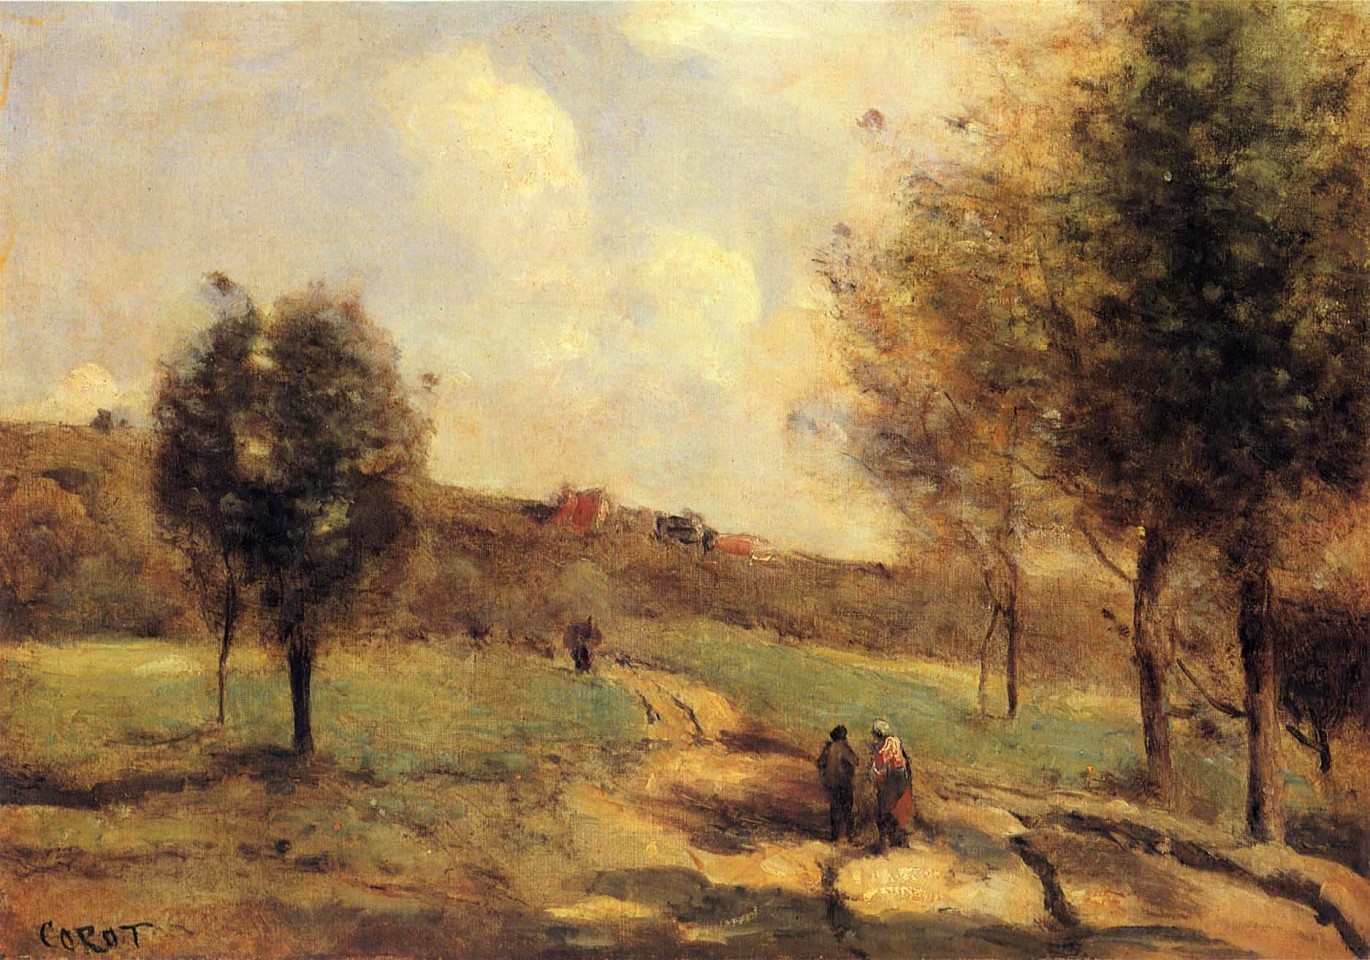 Jean Baptiste Camille Corot, Coubron - Route Montante, ca. 1870
Oil on canvas, 10 x 14 in. (25.4 x 35.6 cm)
COR-007-PA
Appraisal Value: $275,000 est.
User2: $0.00
User3: $0.00